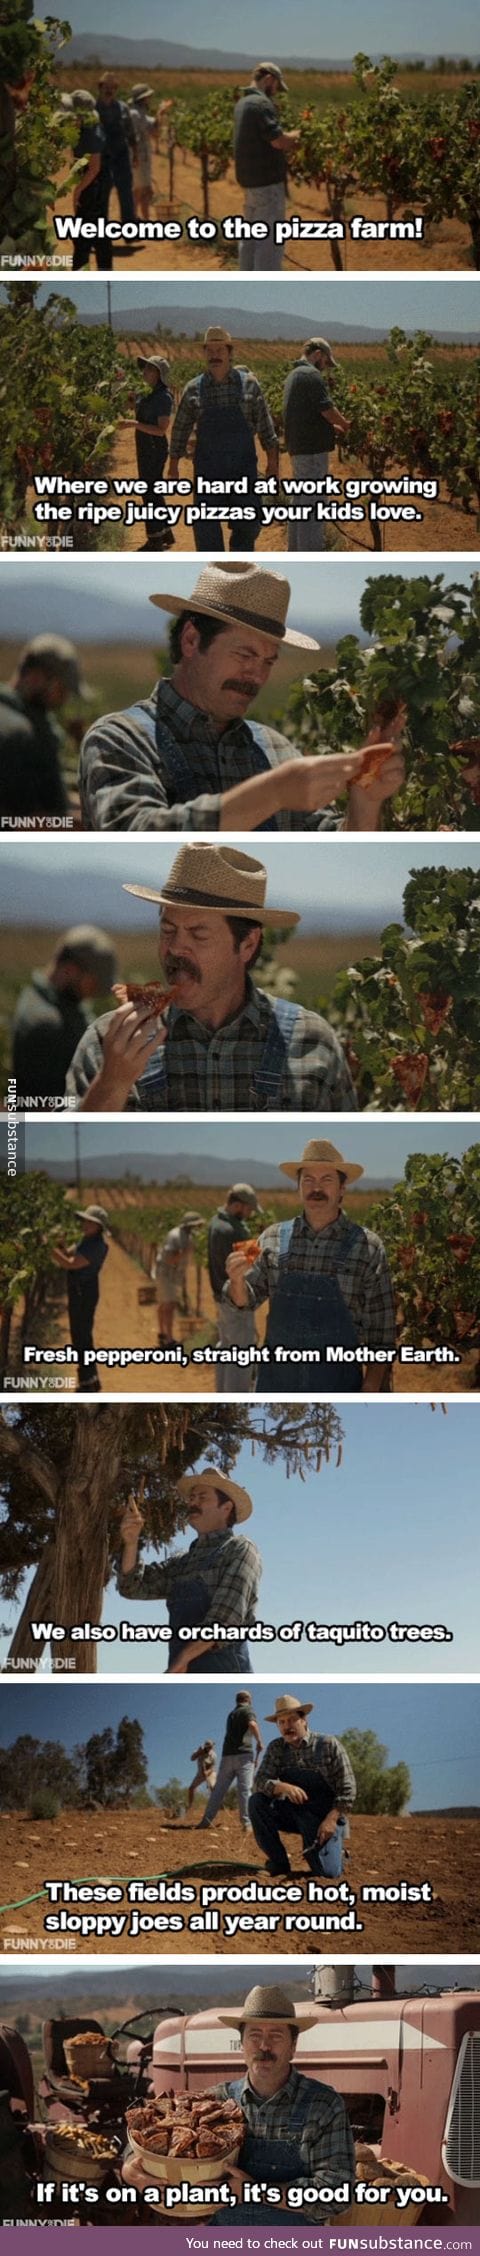 Nick offerman shows off his pizza farm